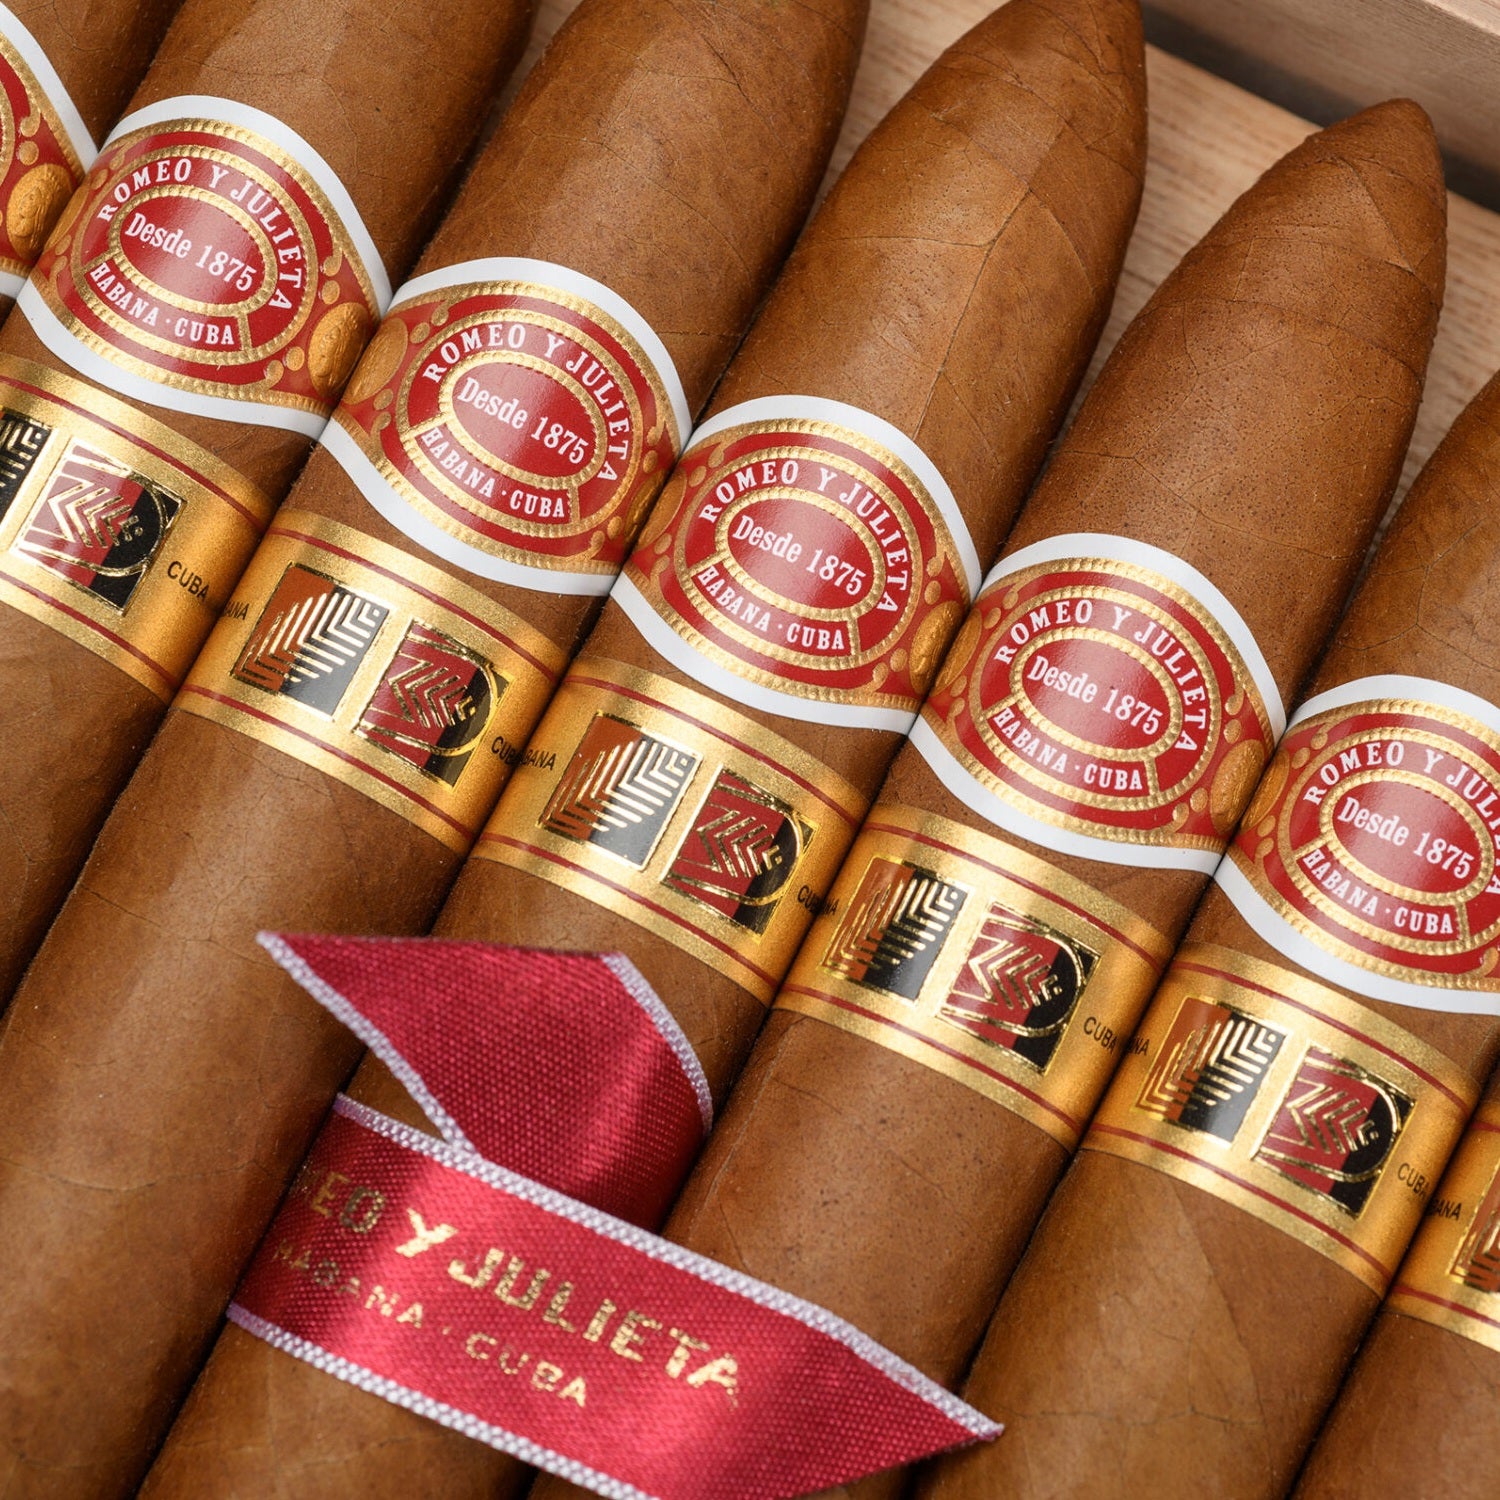 Romeo y Julieta Cupidos: A Symphony of Flavor and Tradition